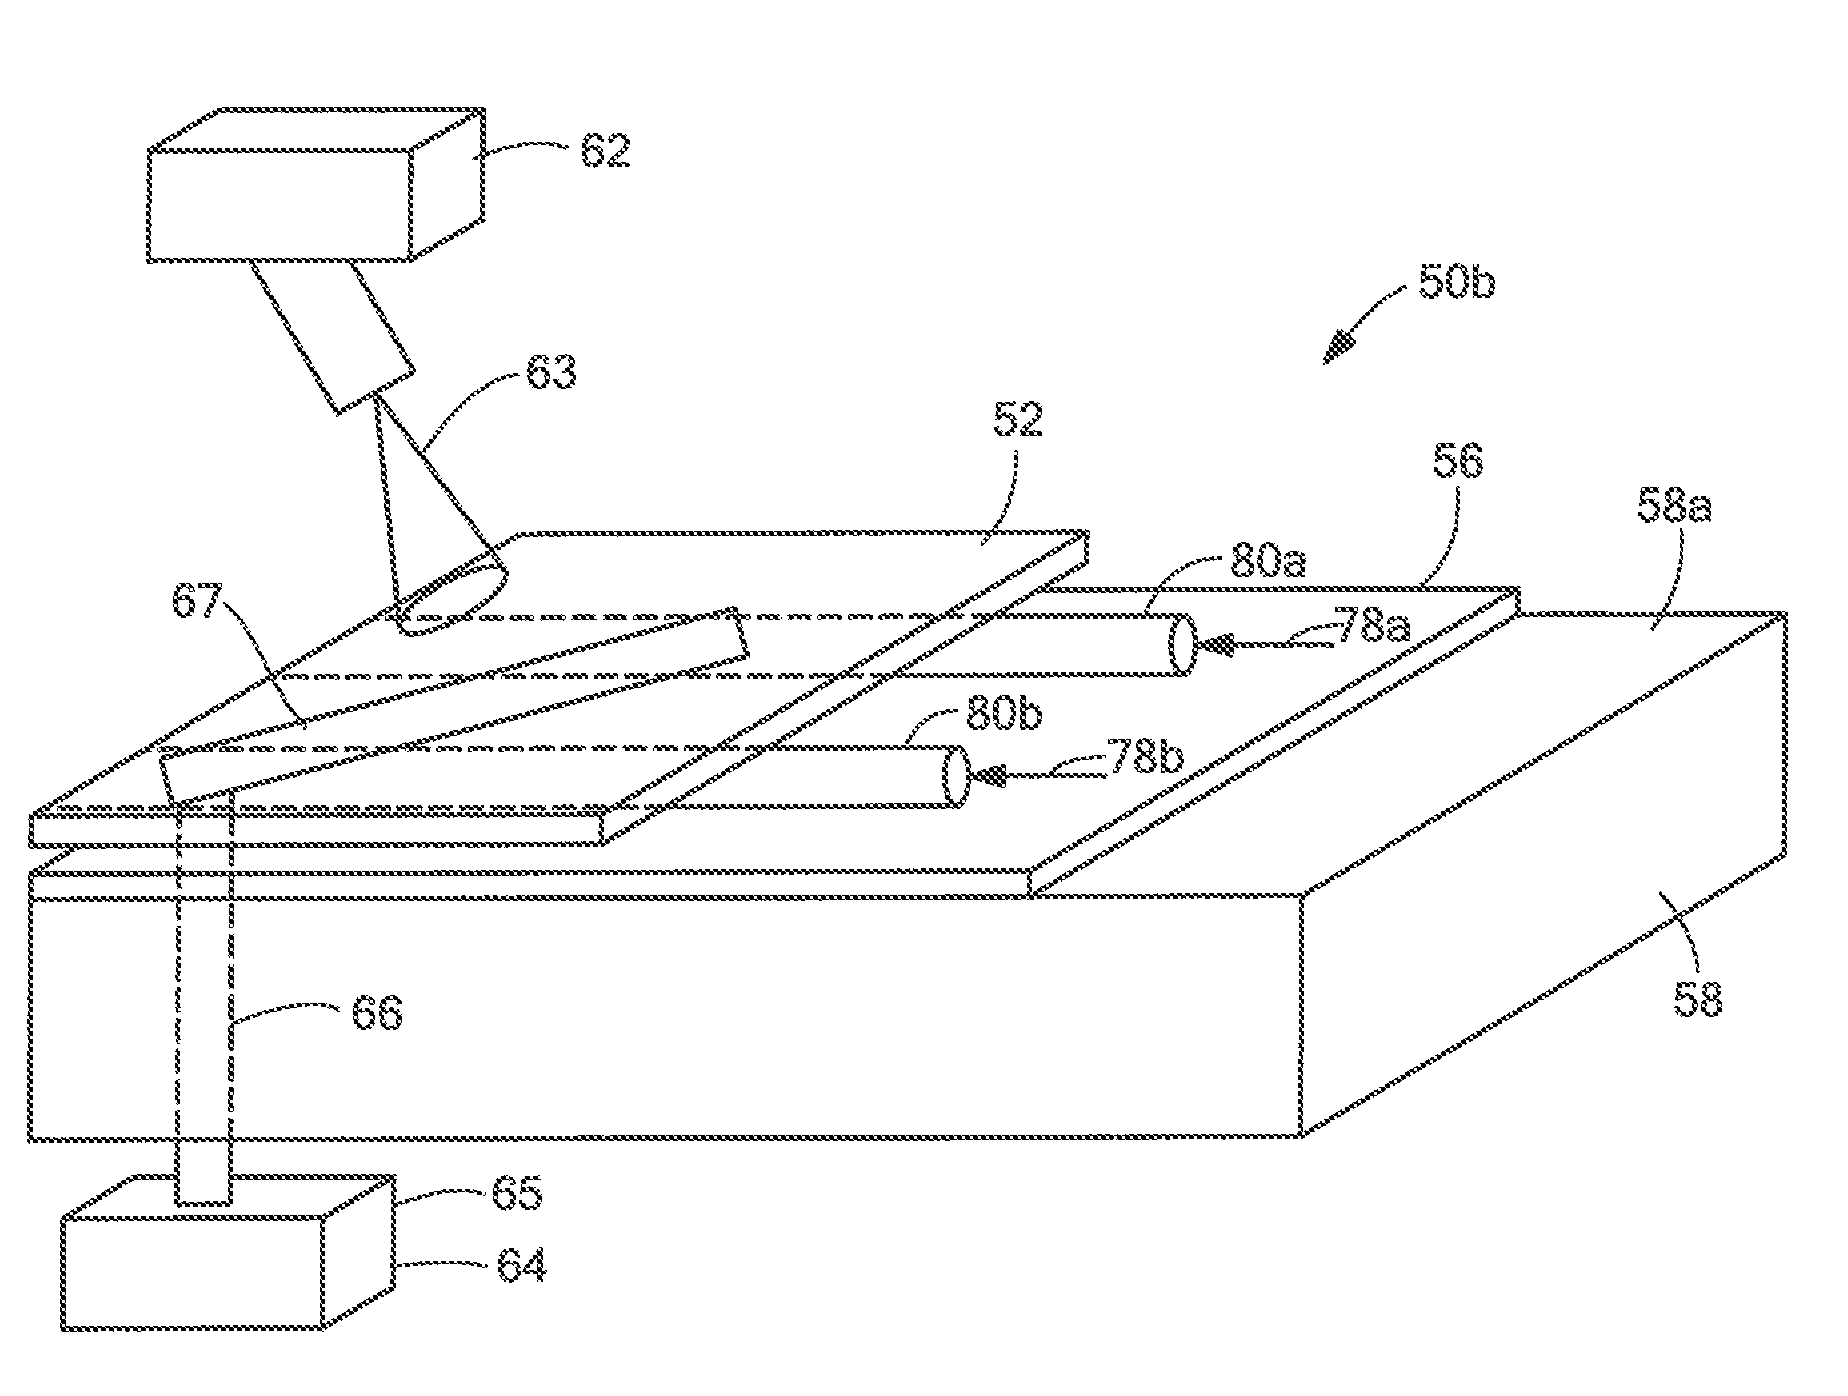 Method and Apparatus for Removing Biofouling From a Protected Surface in a Liquid Environment